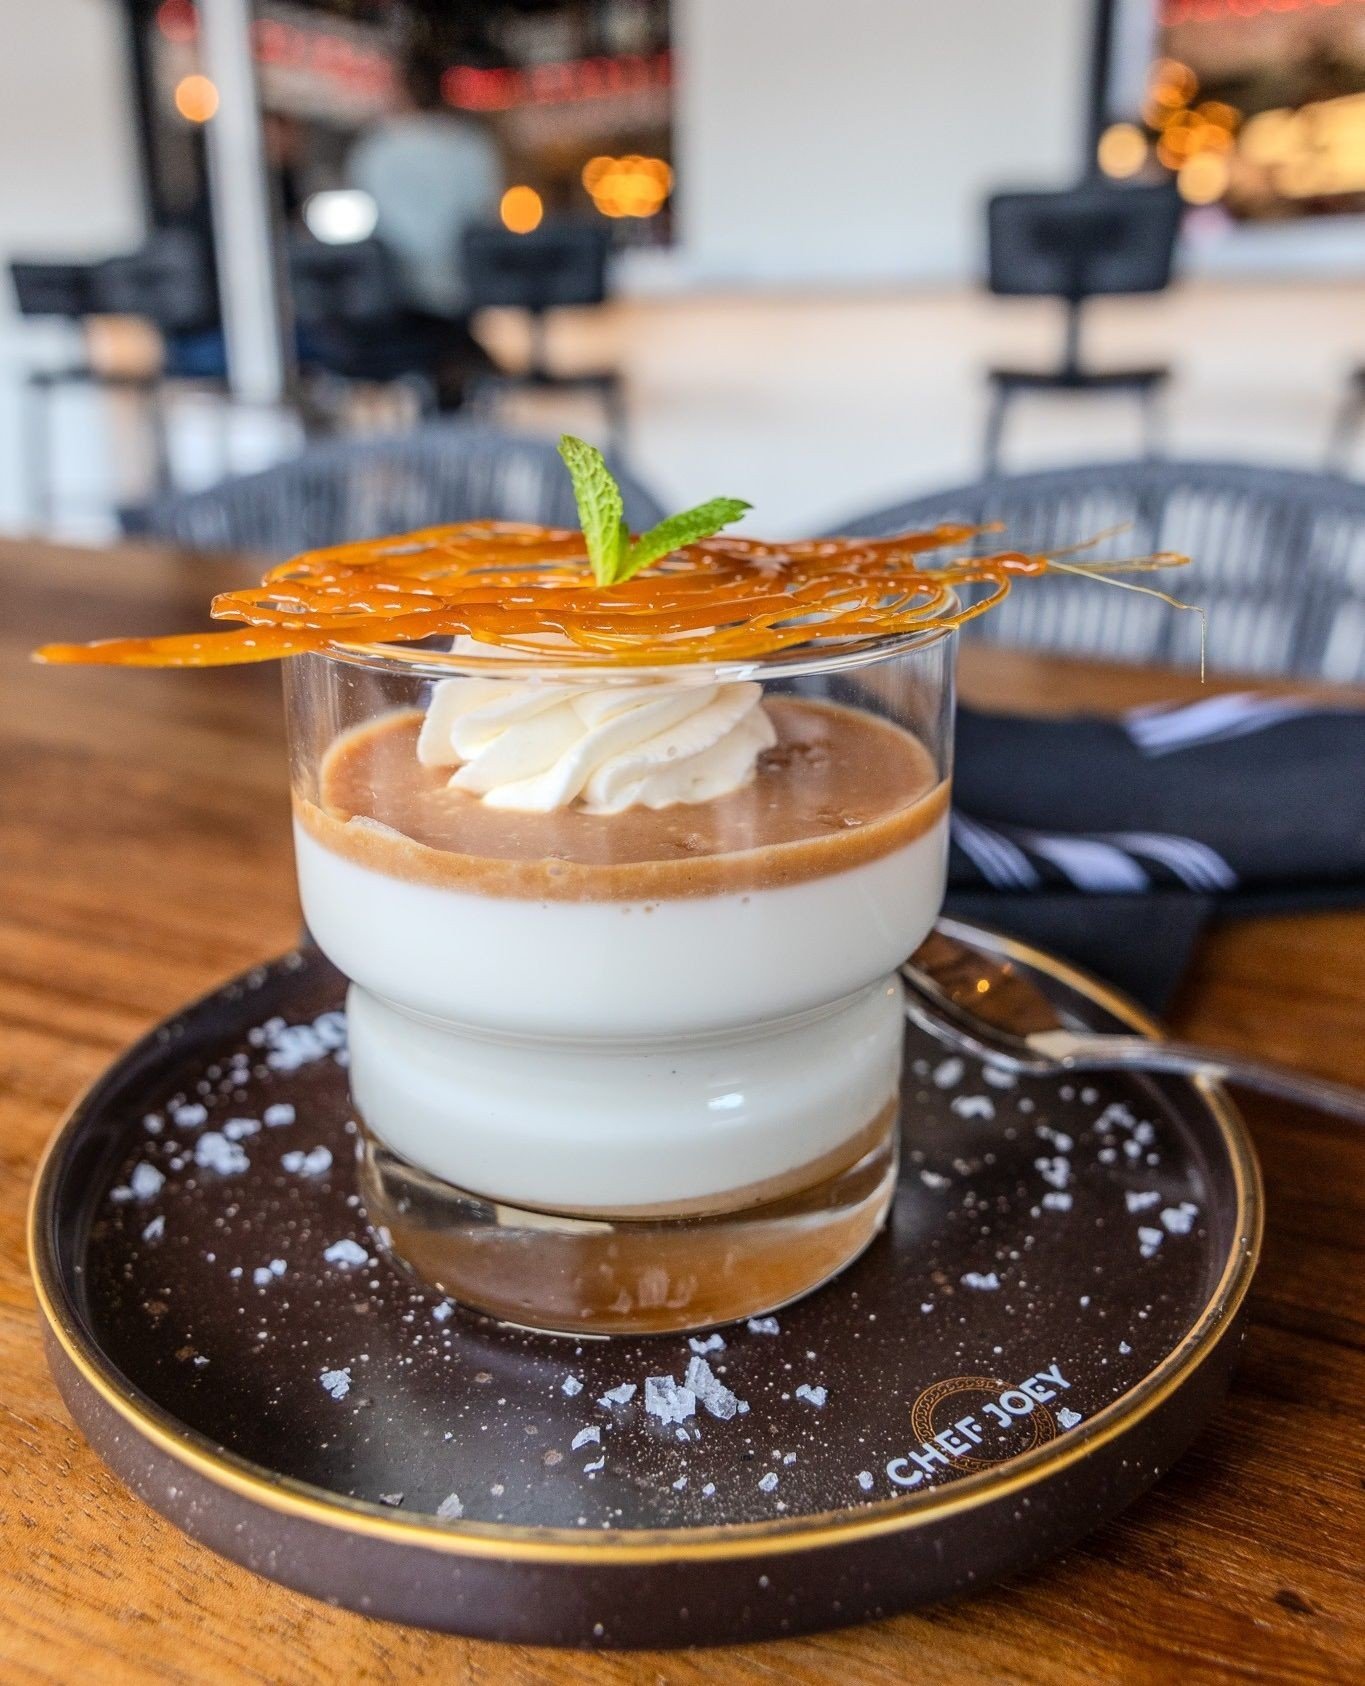 It's Saturday, which means it's time to TREAT YO SELF after a long work week 🔥⁠
⁠
Have you tried our newest dessert yet?⁠
⁠
Our new Salted Caramel Panna Cotta is celebrating-Saturday worthy for sure 🤤⁠
.⁠
.⁠
.⁠
#therosticceria #rosticceria #azfood 